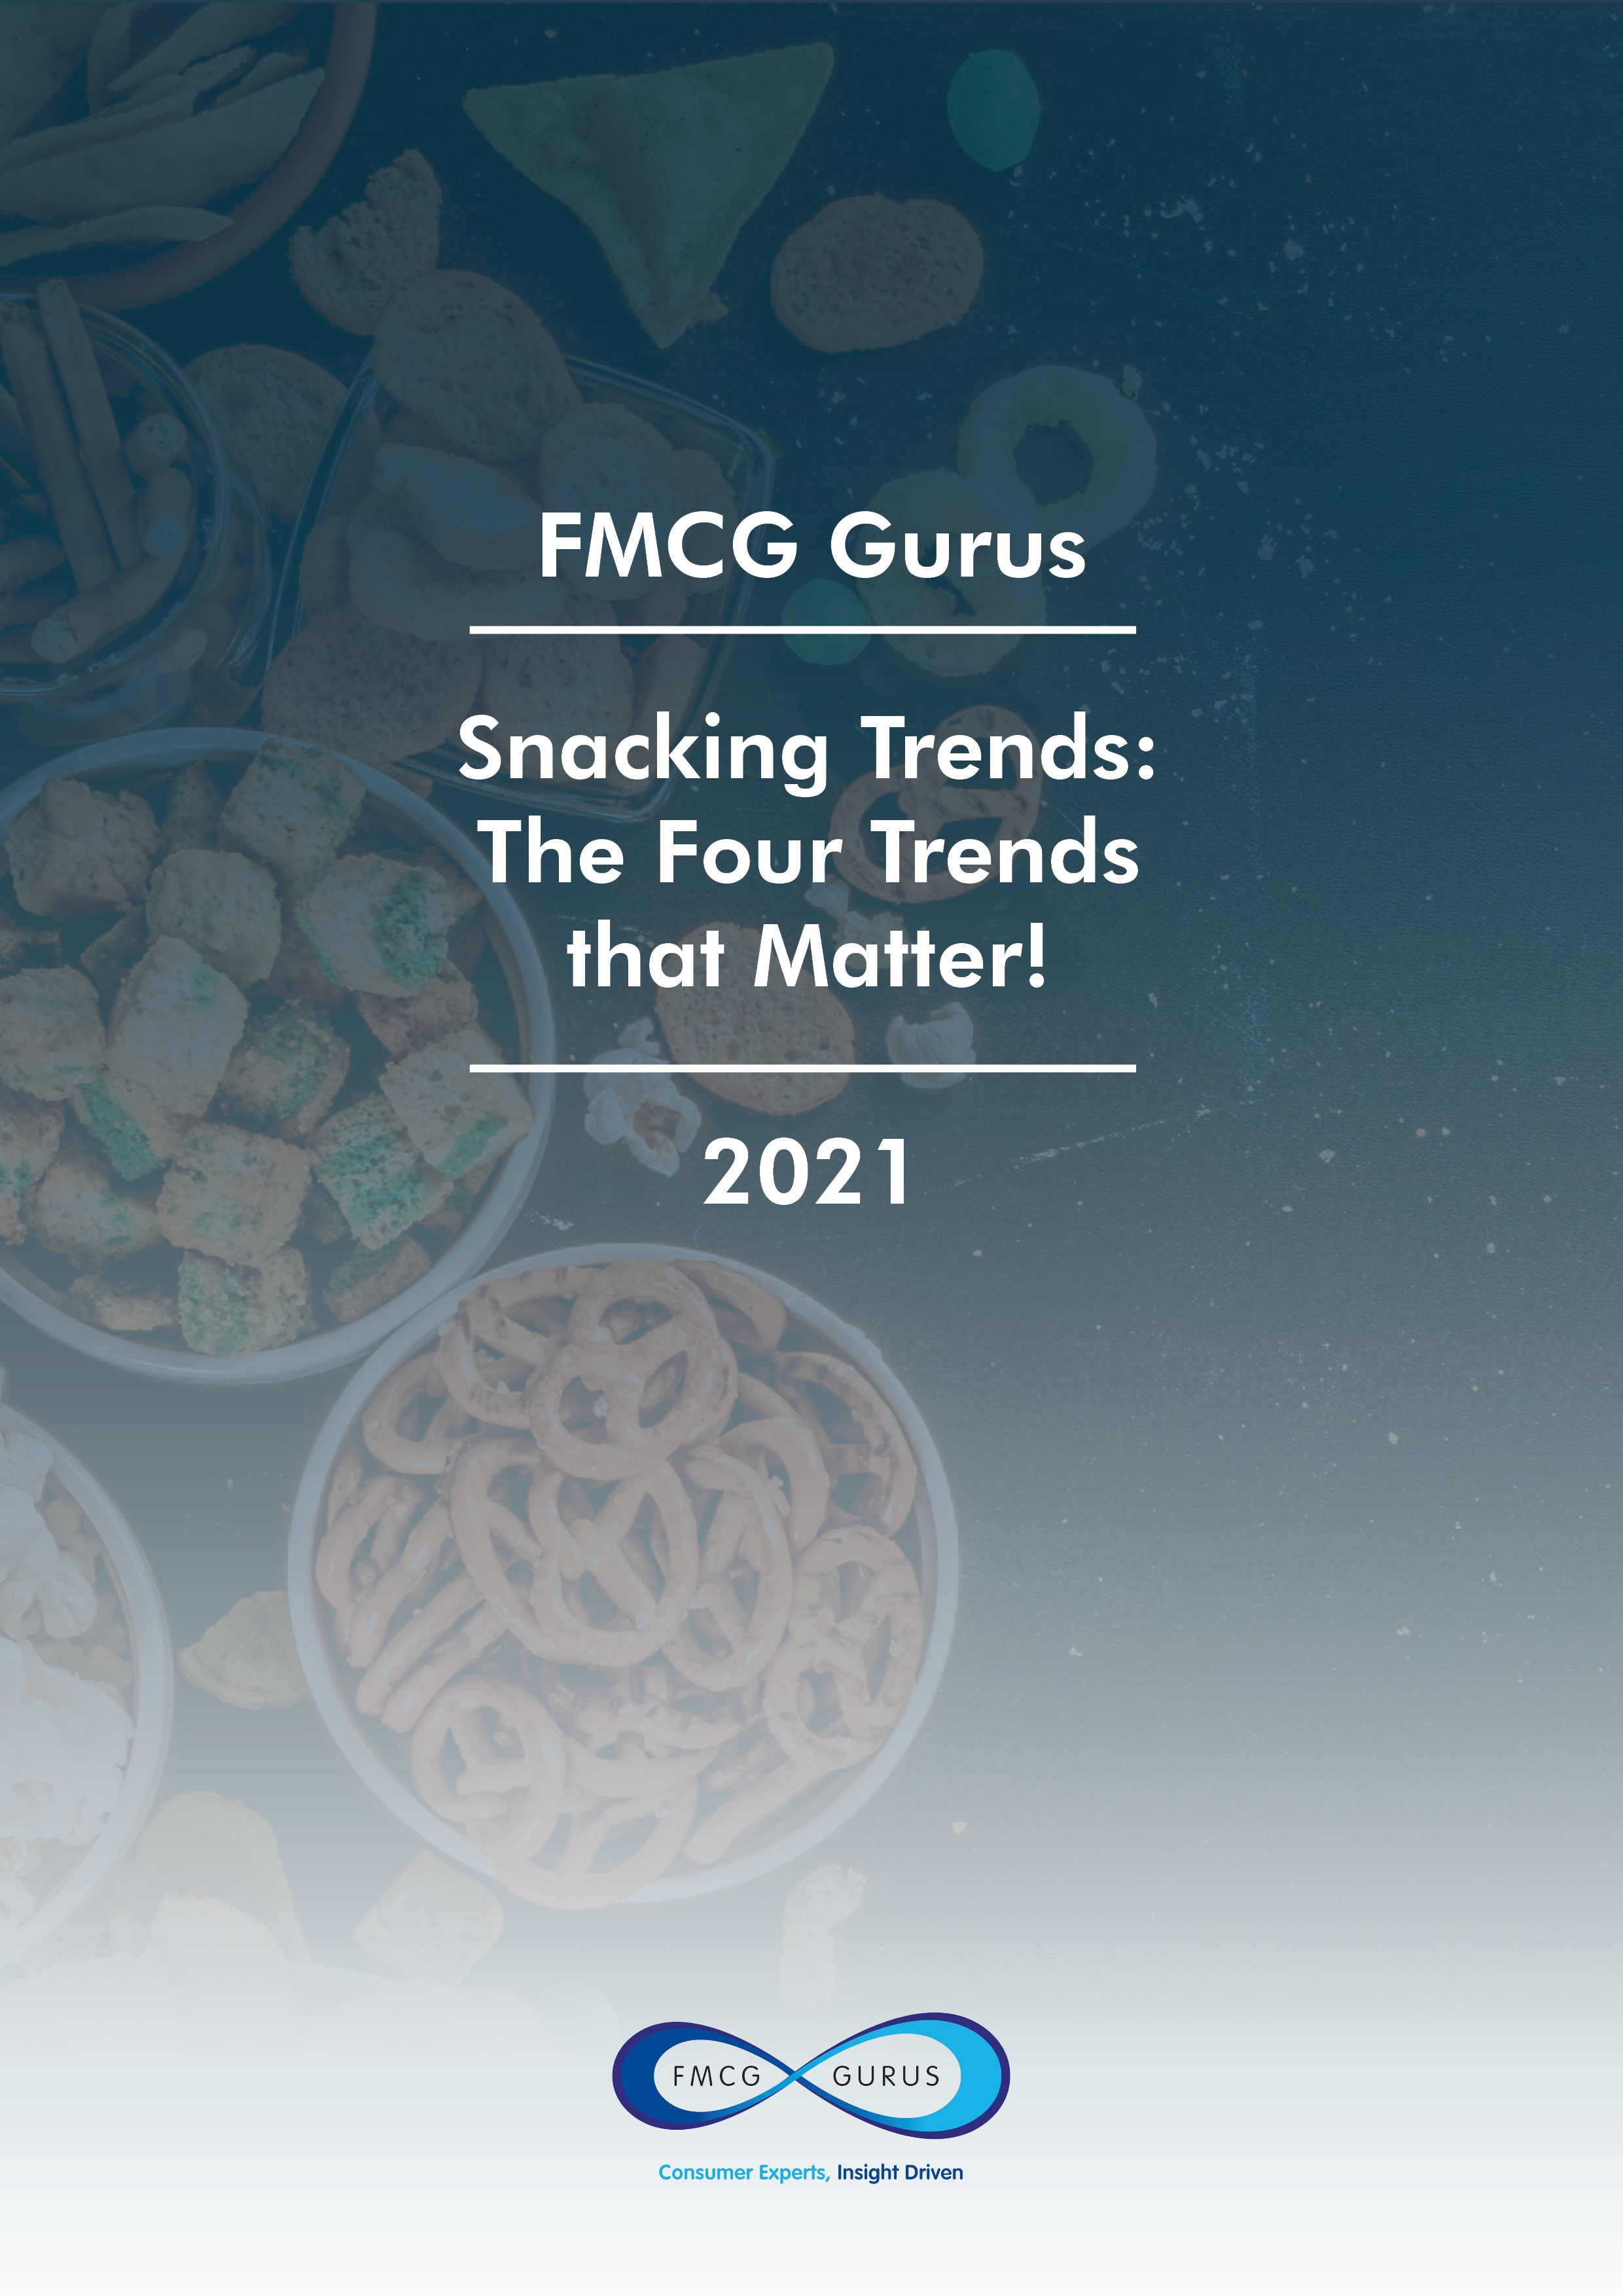 FMCG Gurus - Snacking Trends - Four Crucial Elements